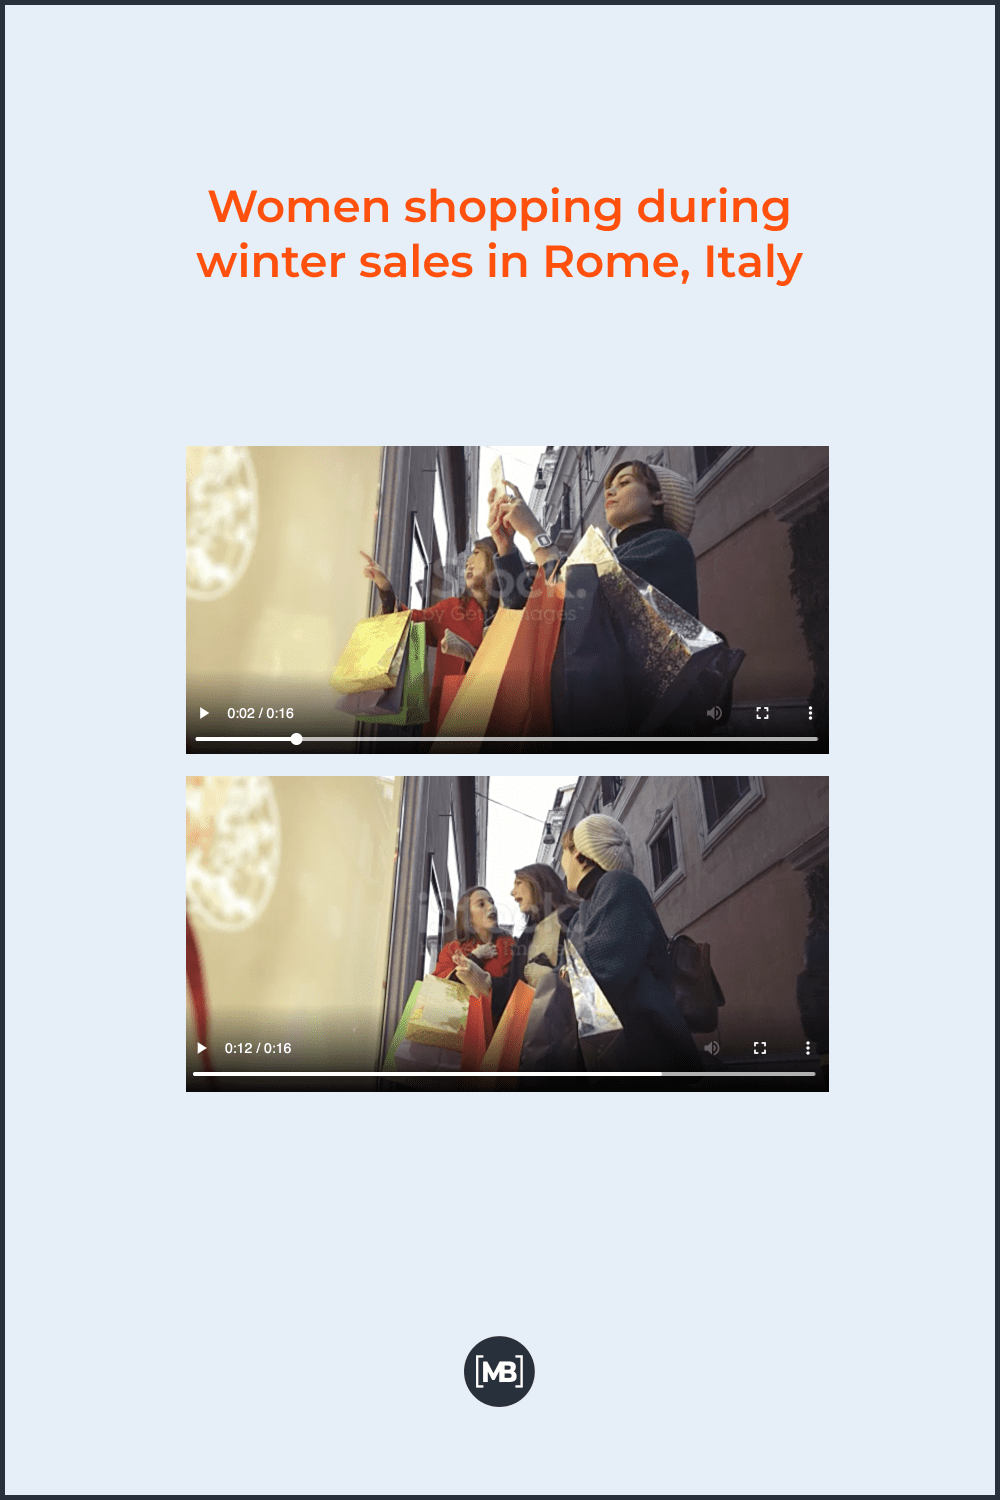 Women shopping during winter sales in Rome.